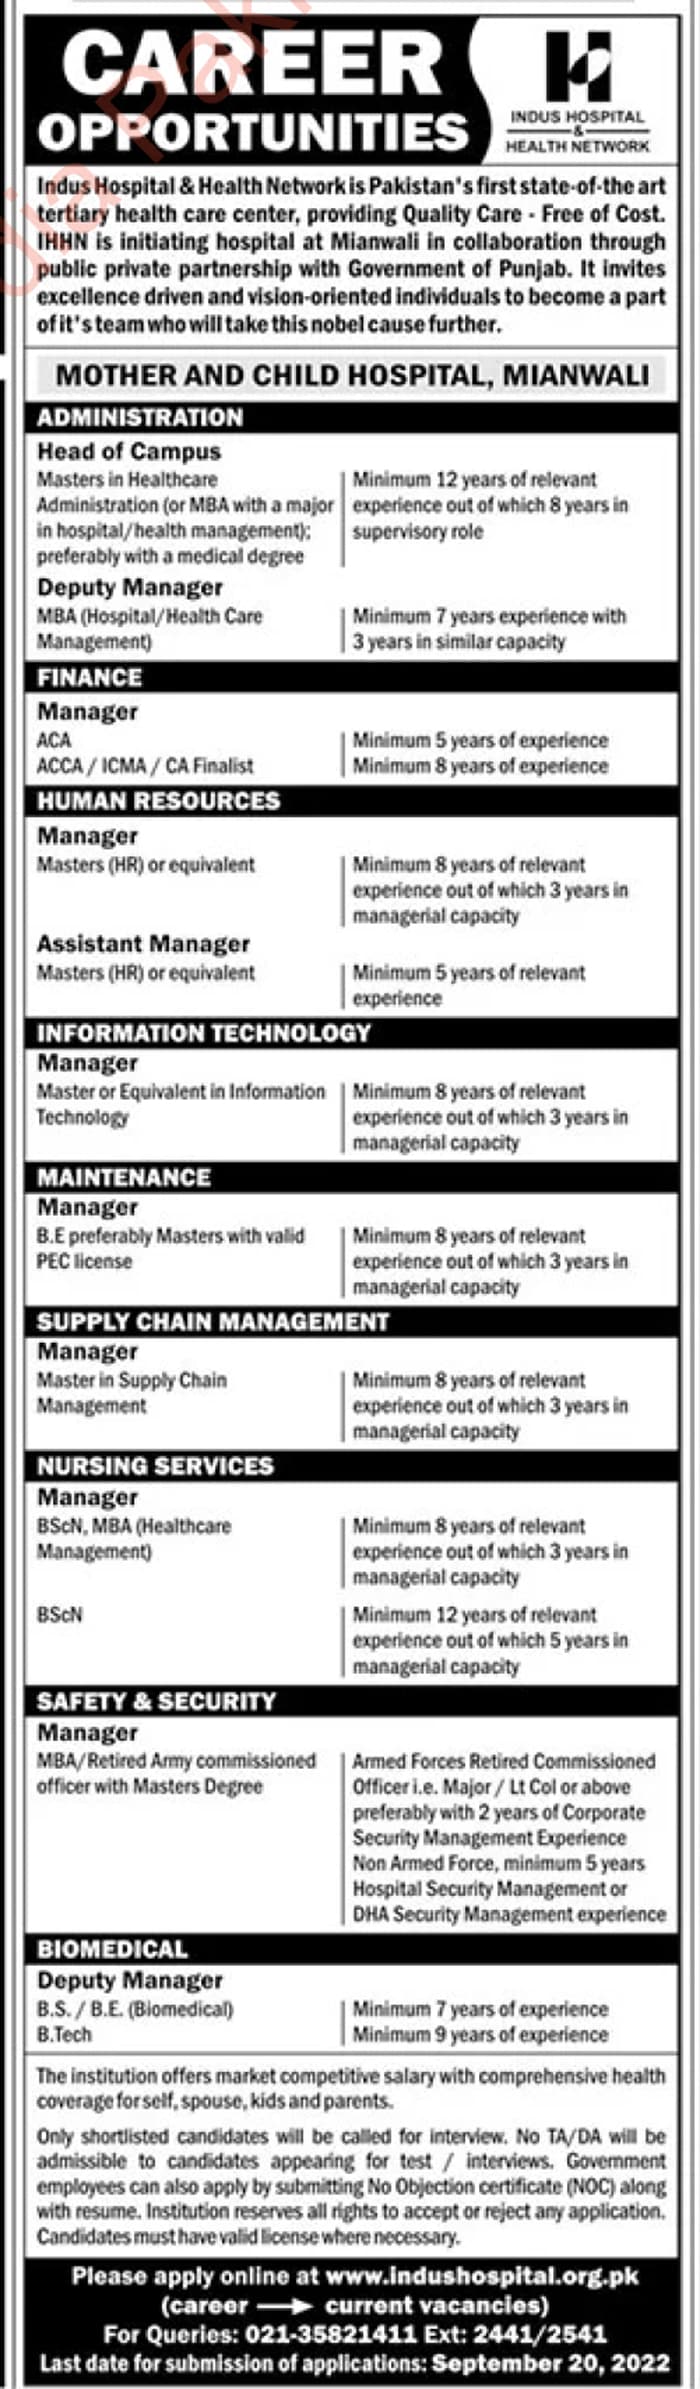 Indus Hospital and Health Network Jobs 2022 in Mianwali